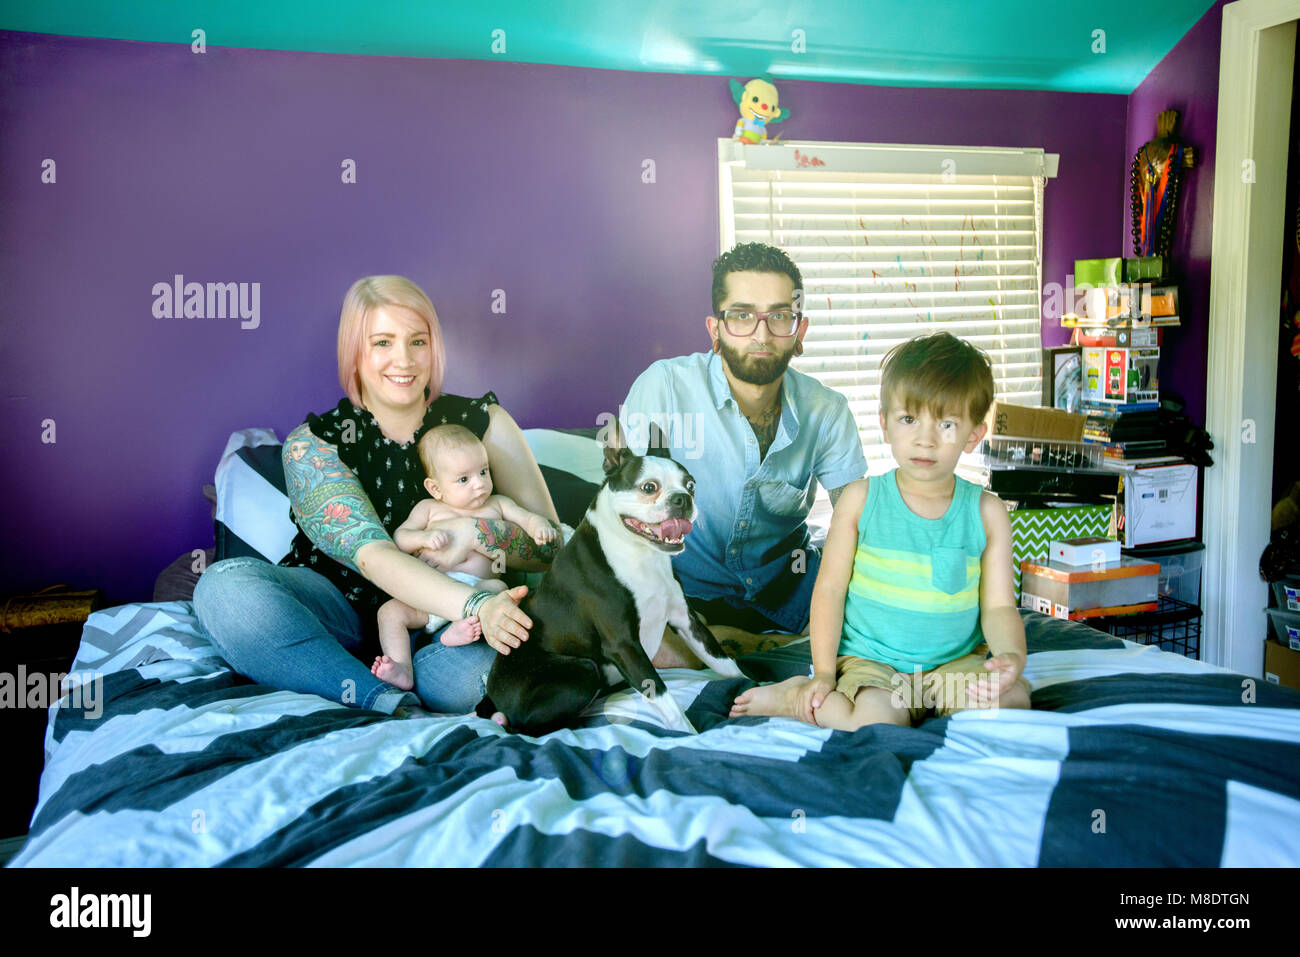 Family on bed in bedroom Stock Photo